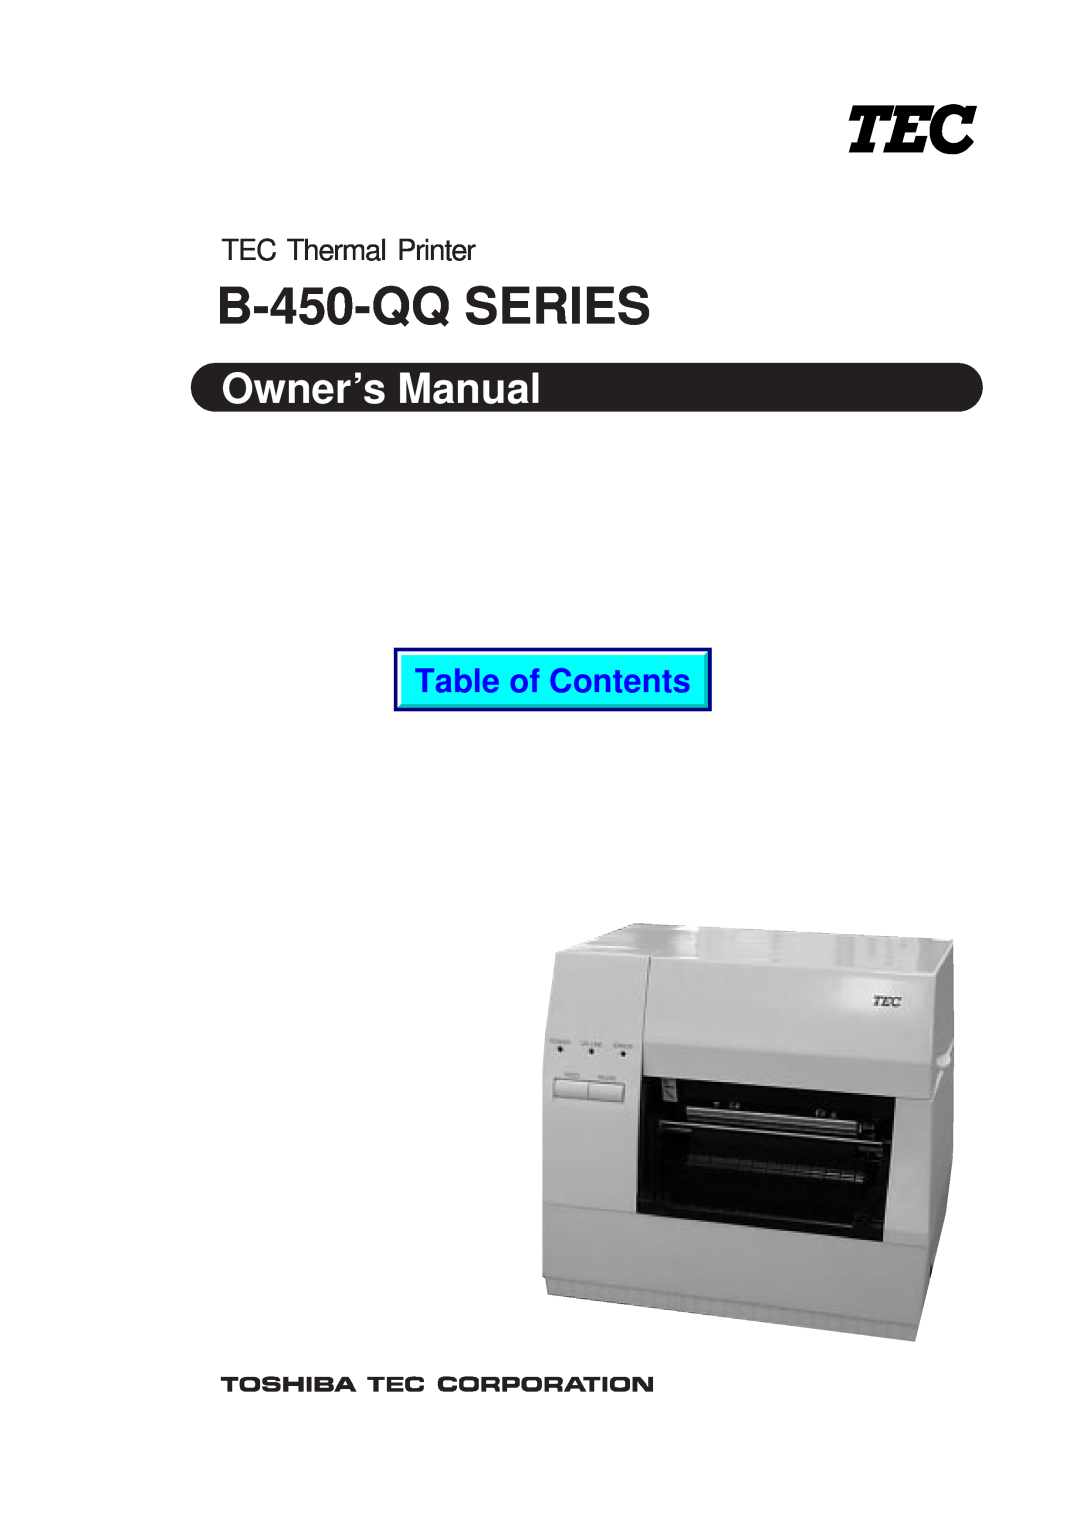 Toshiba owner manual B-450-QQ SERIES, Owner’s Manual, Table of Contents, TEC Thermal Printer 